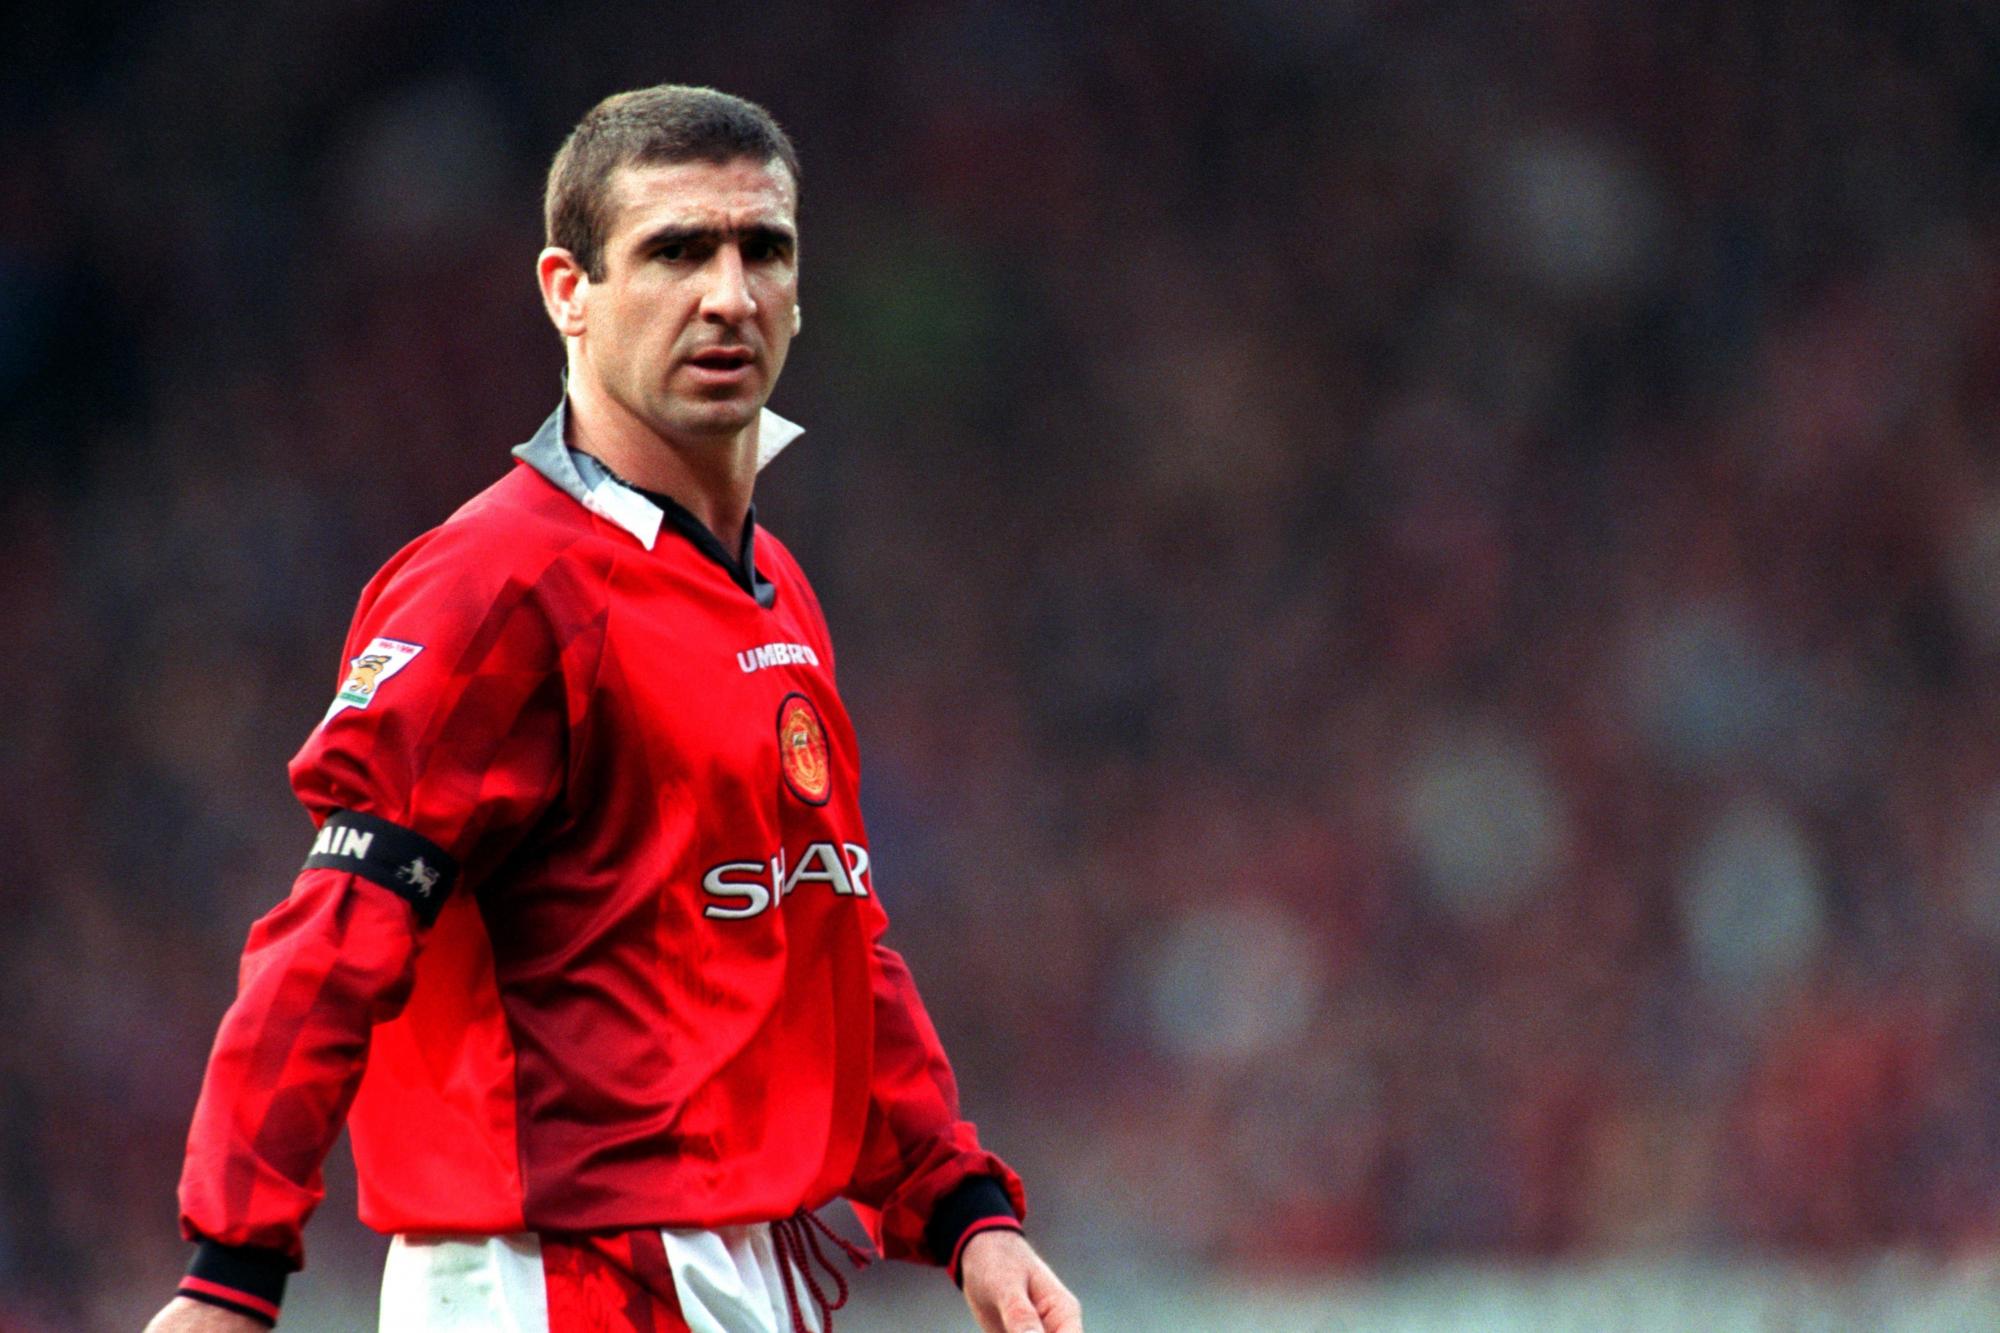 Eric Cantona Is The Man To Restore Some Pride At Manchester United